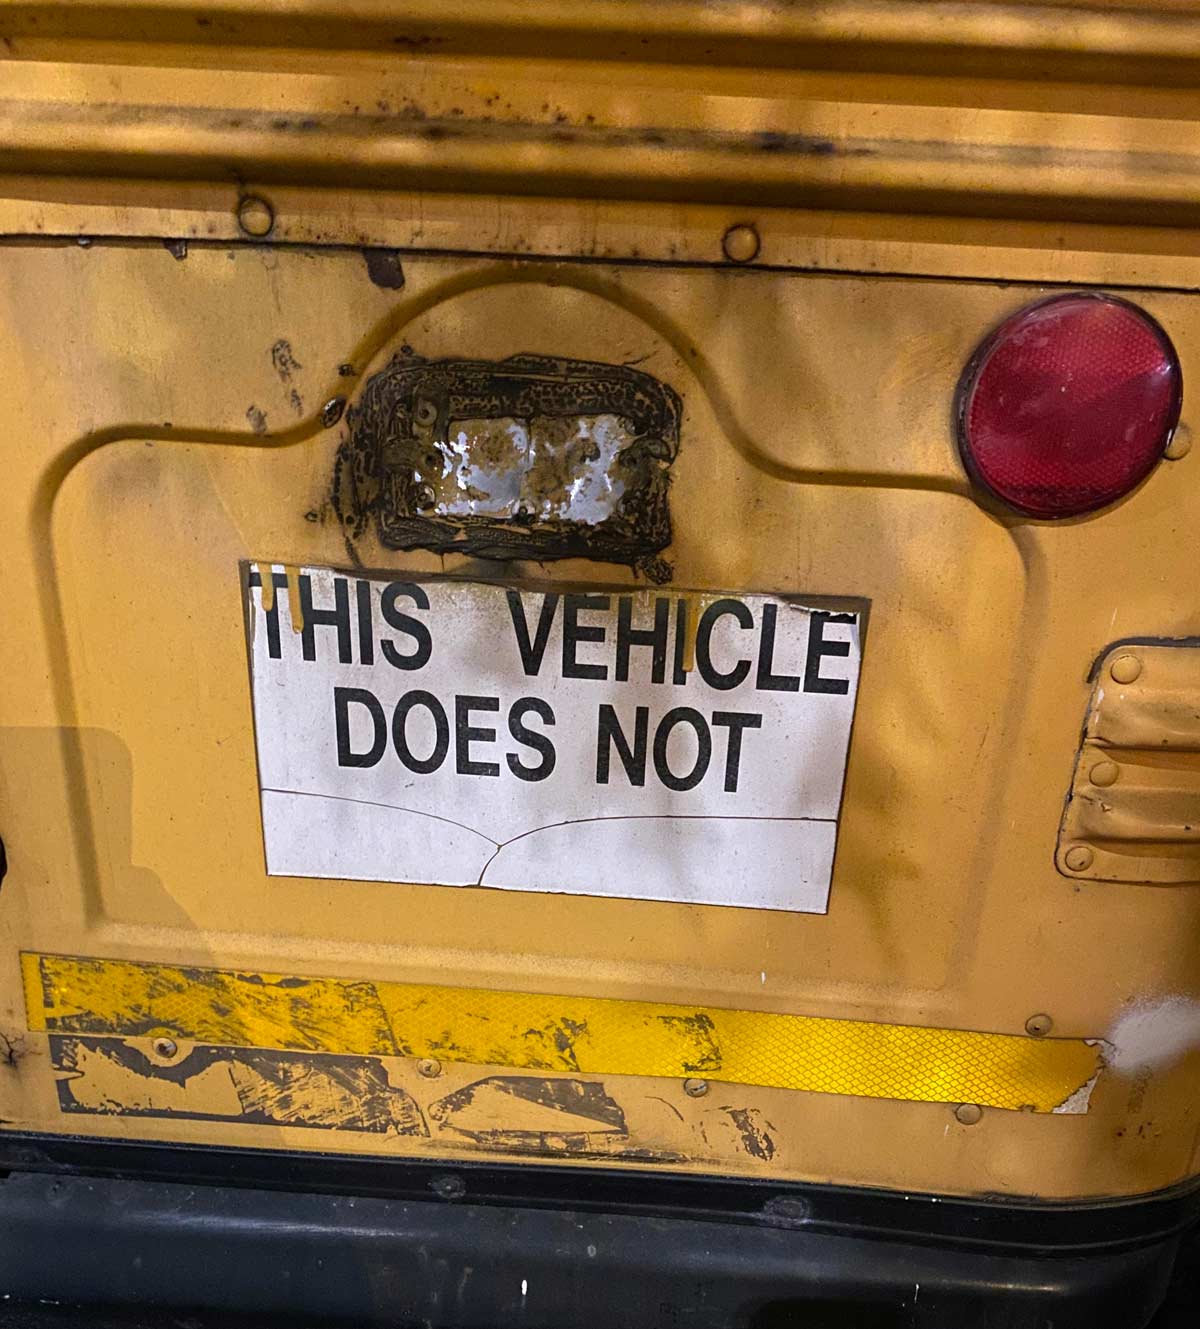 Whatever you may have expected this bus to do, forget it